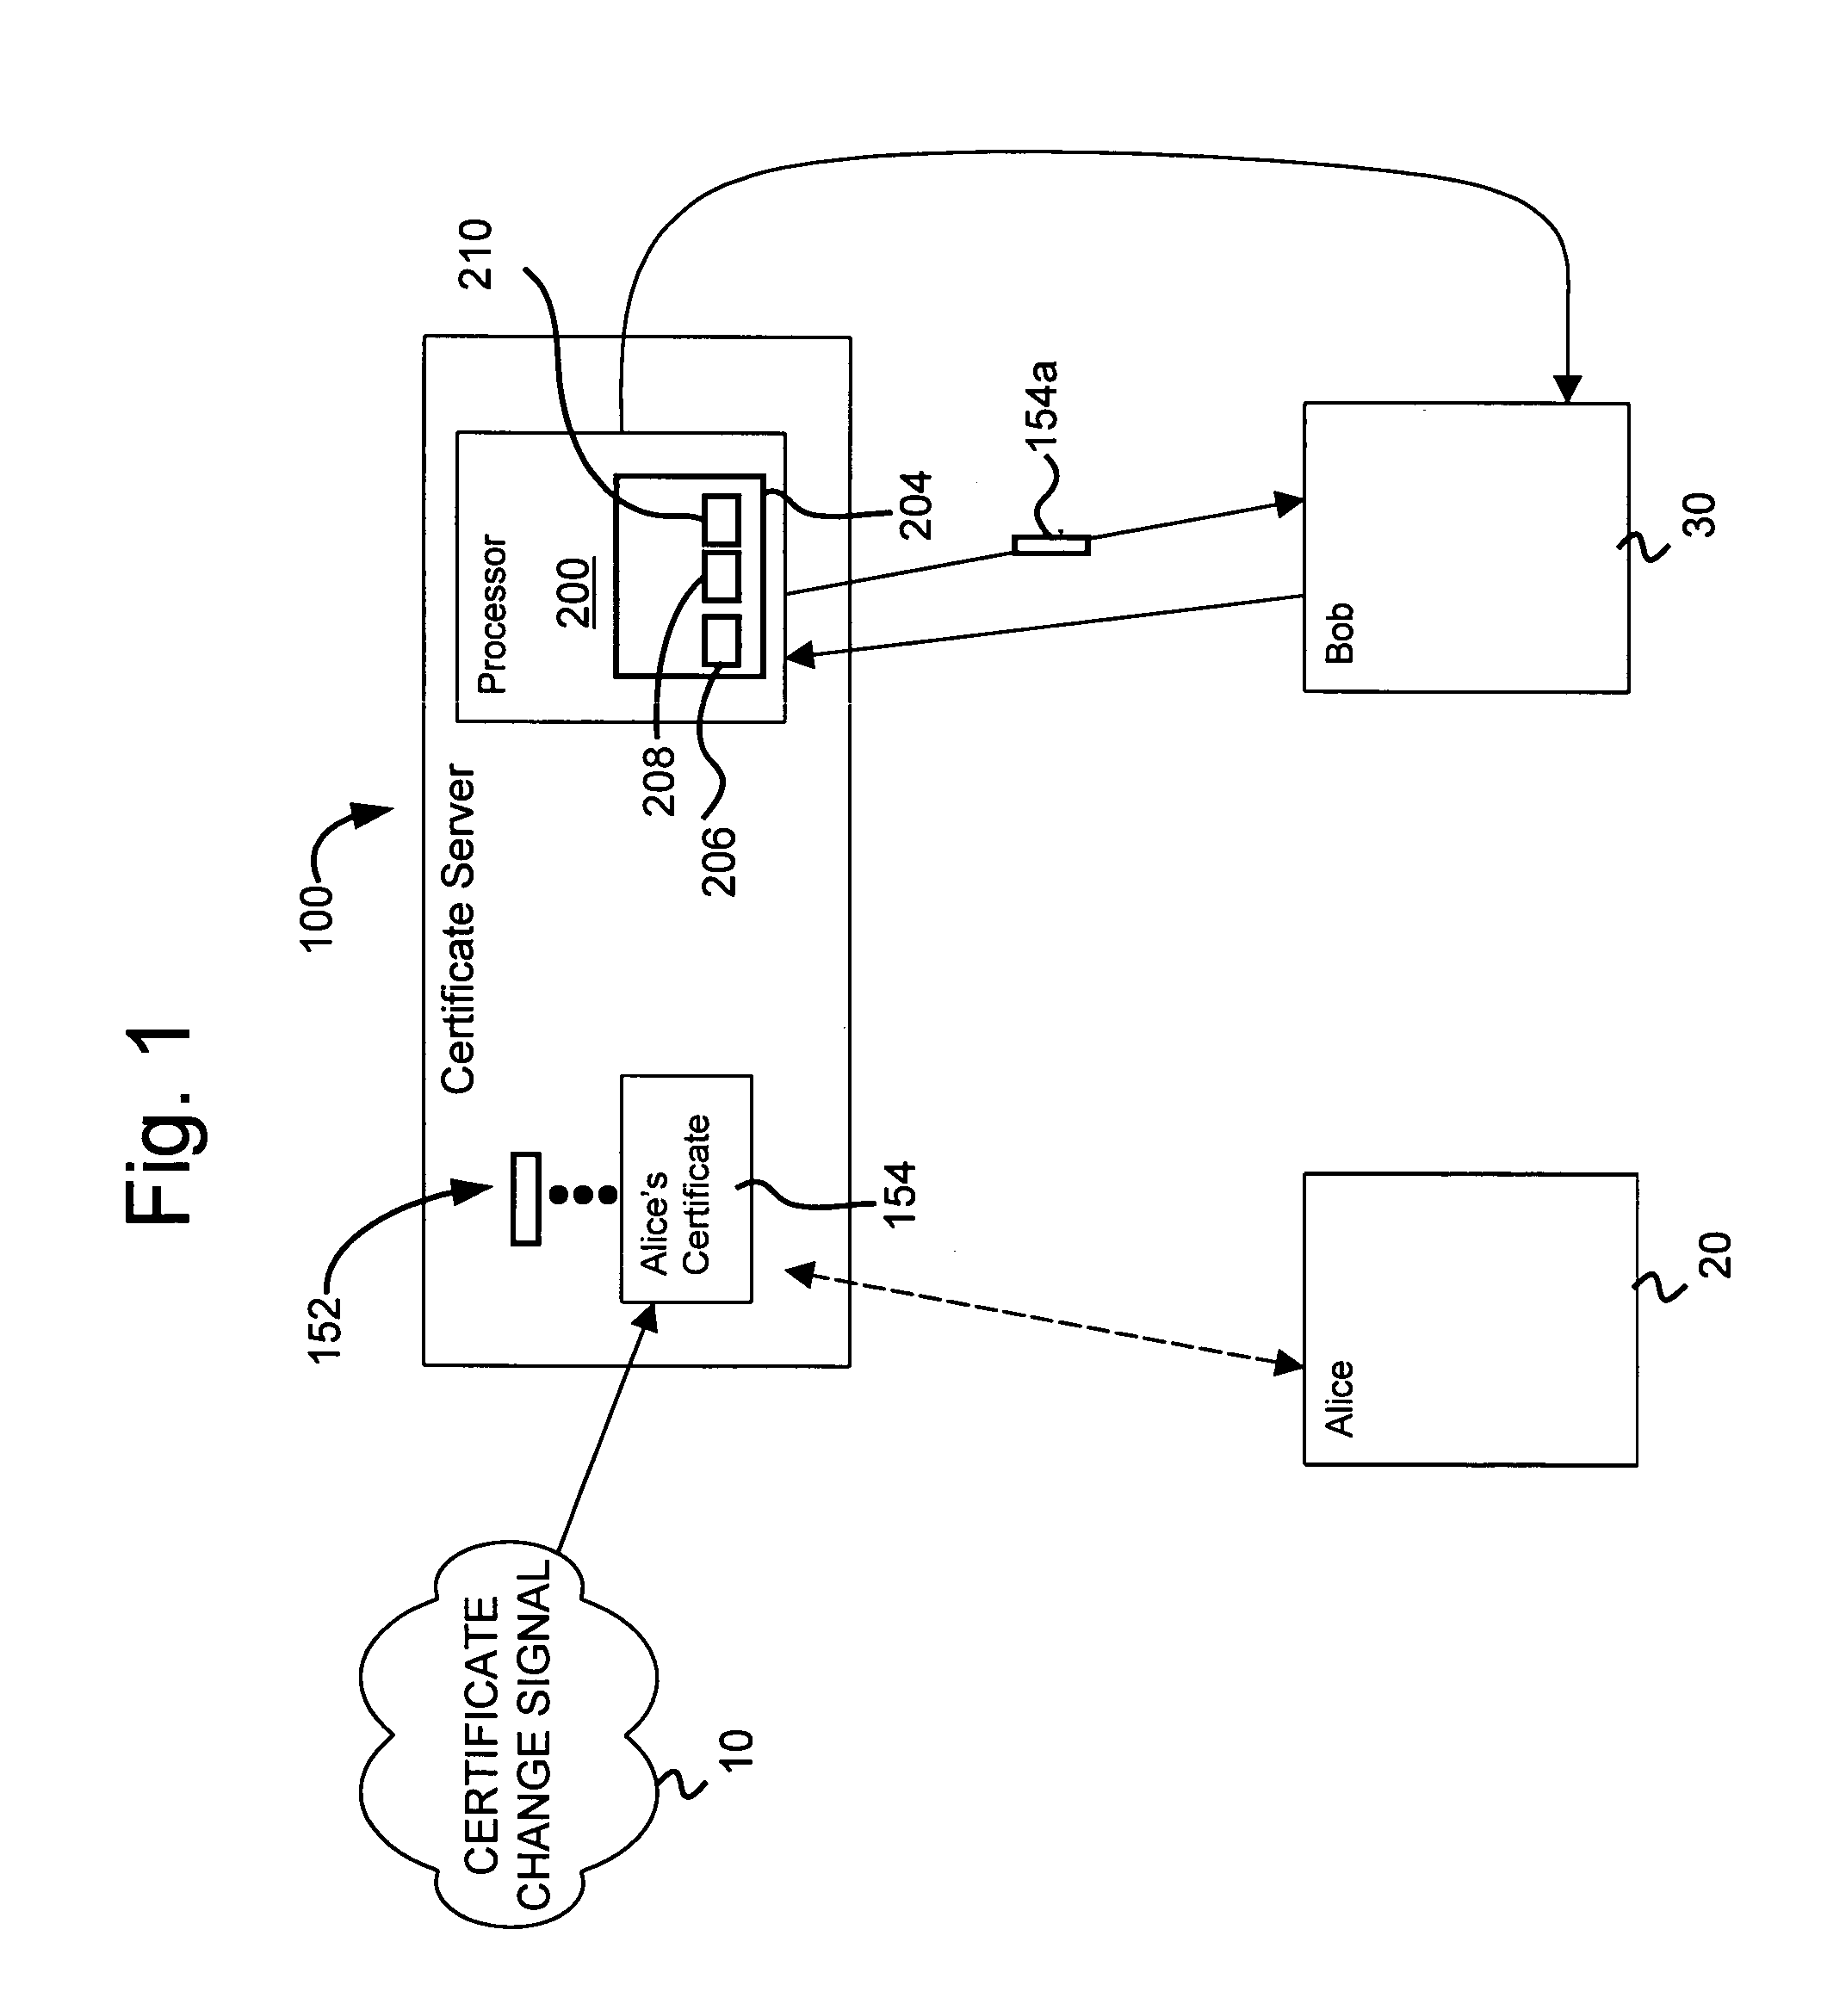 Method and system for management and notification of electronic certificate changes